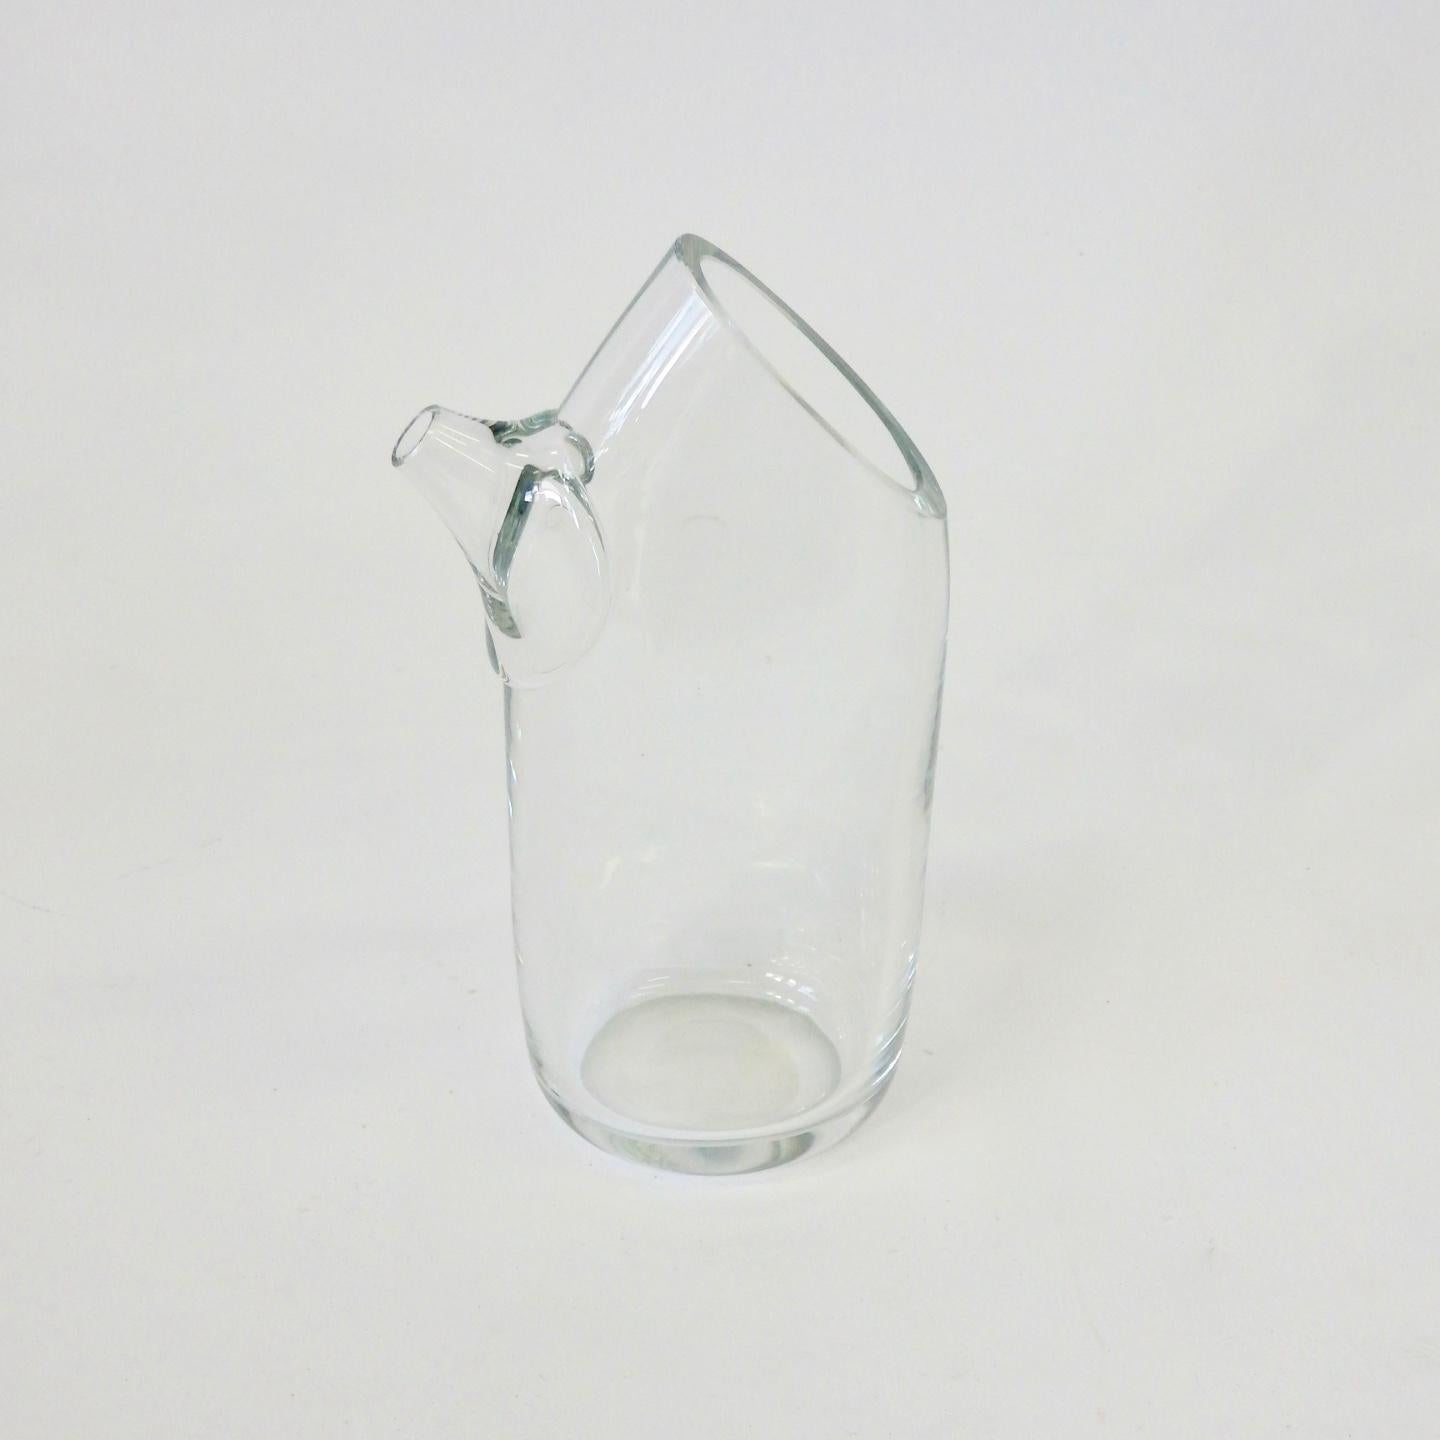 Clear glass hand held martini or drinks pitcher incised Kosta. Made in Sweden.